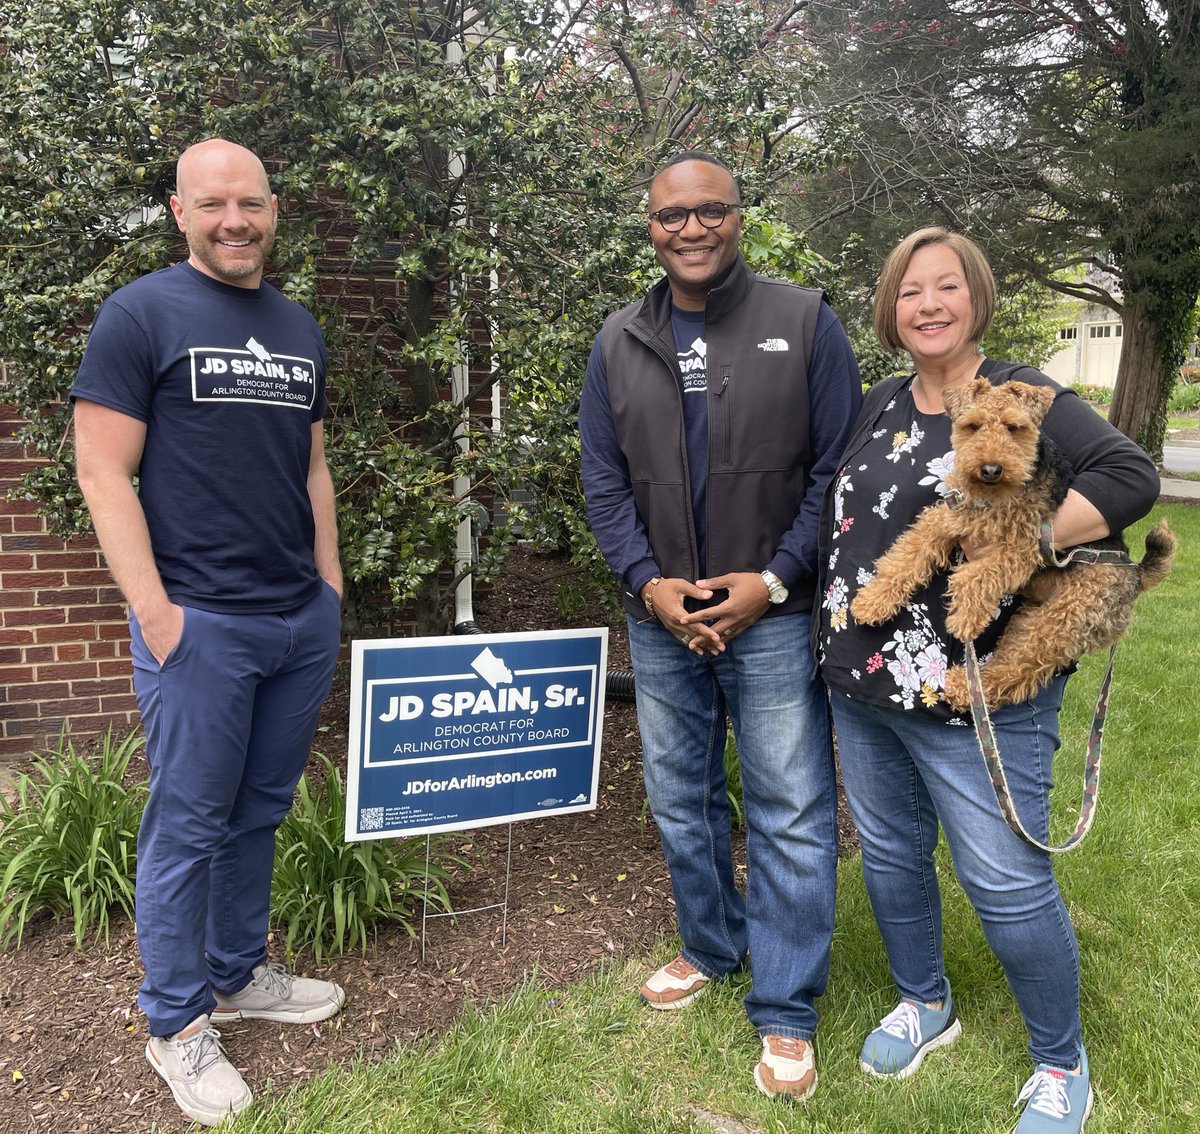 Spent some time in Arlington this afternoon knocking doors for my good friend @JDforArlington. JD is a 27 year veteran of the Marine Corp, and he’s running in the Democratic primary election for Arlington County Board to continue in public service. Early voting starts on May 3rd!